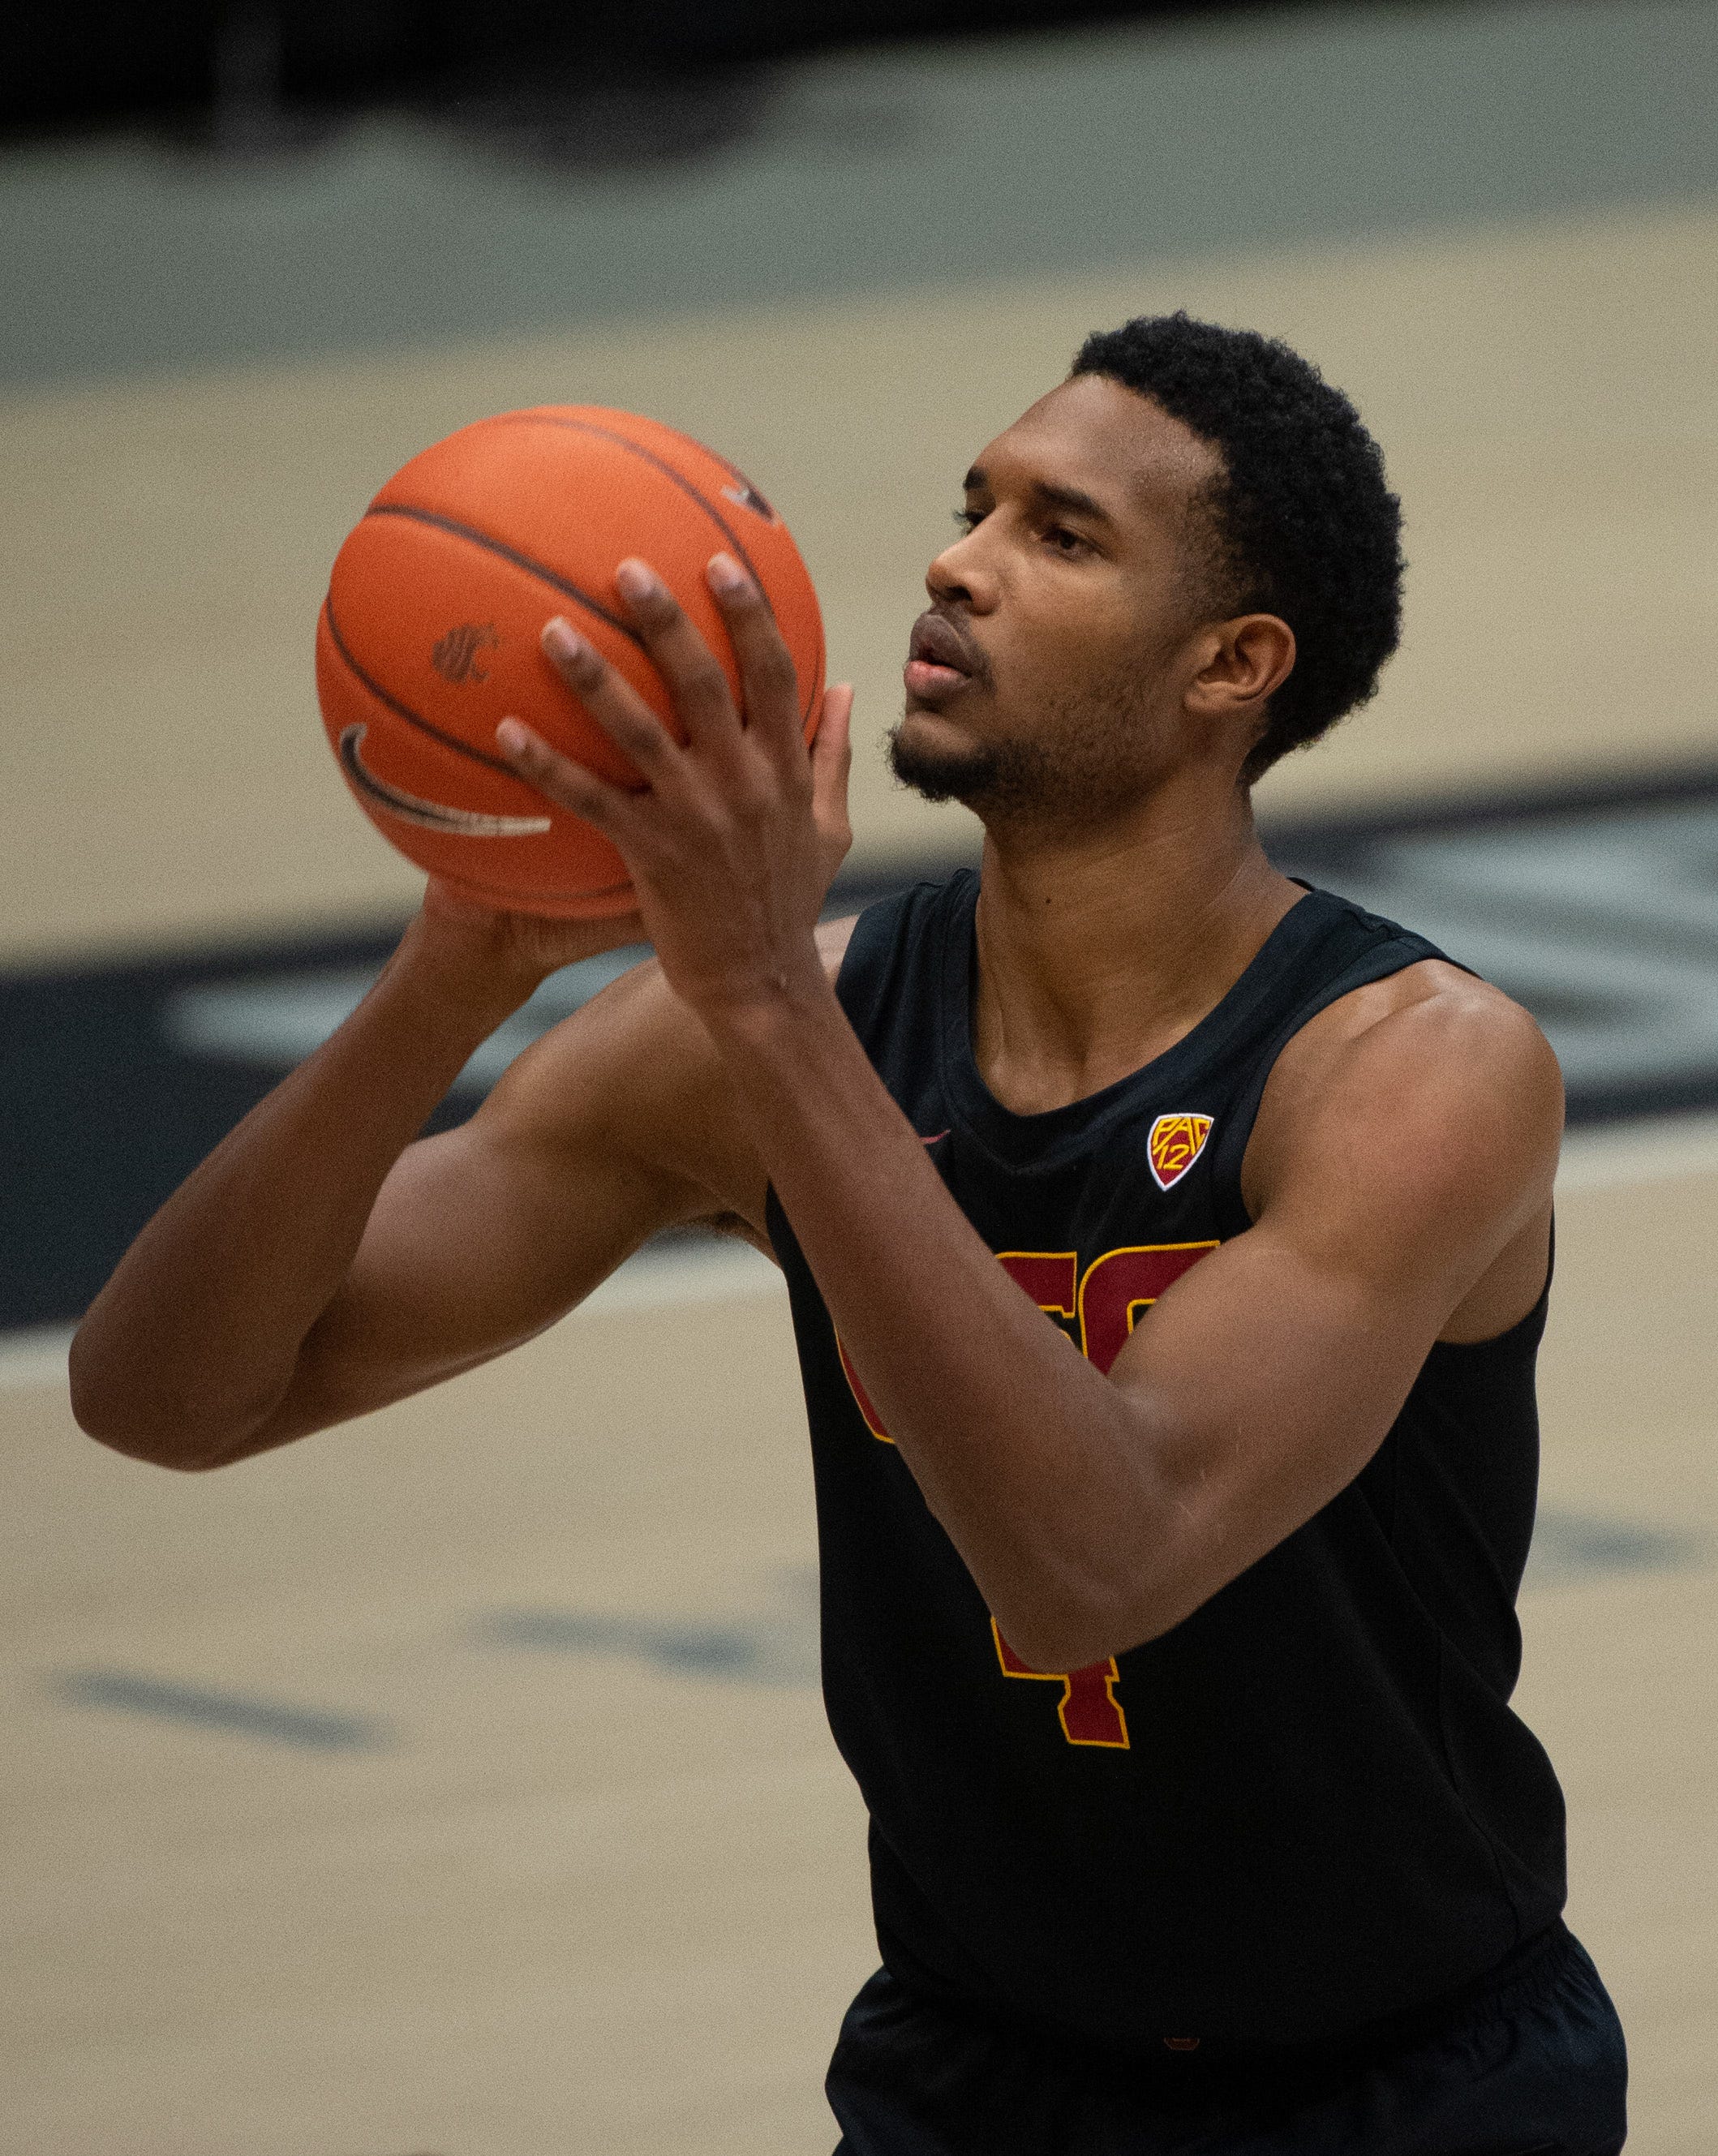 Evan Mobley Reactions to the Cavaliers first round draft pick